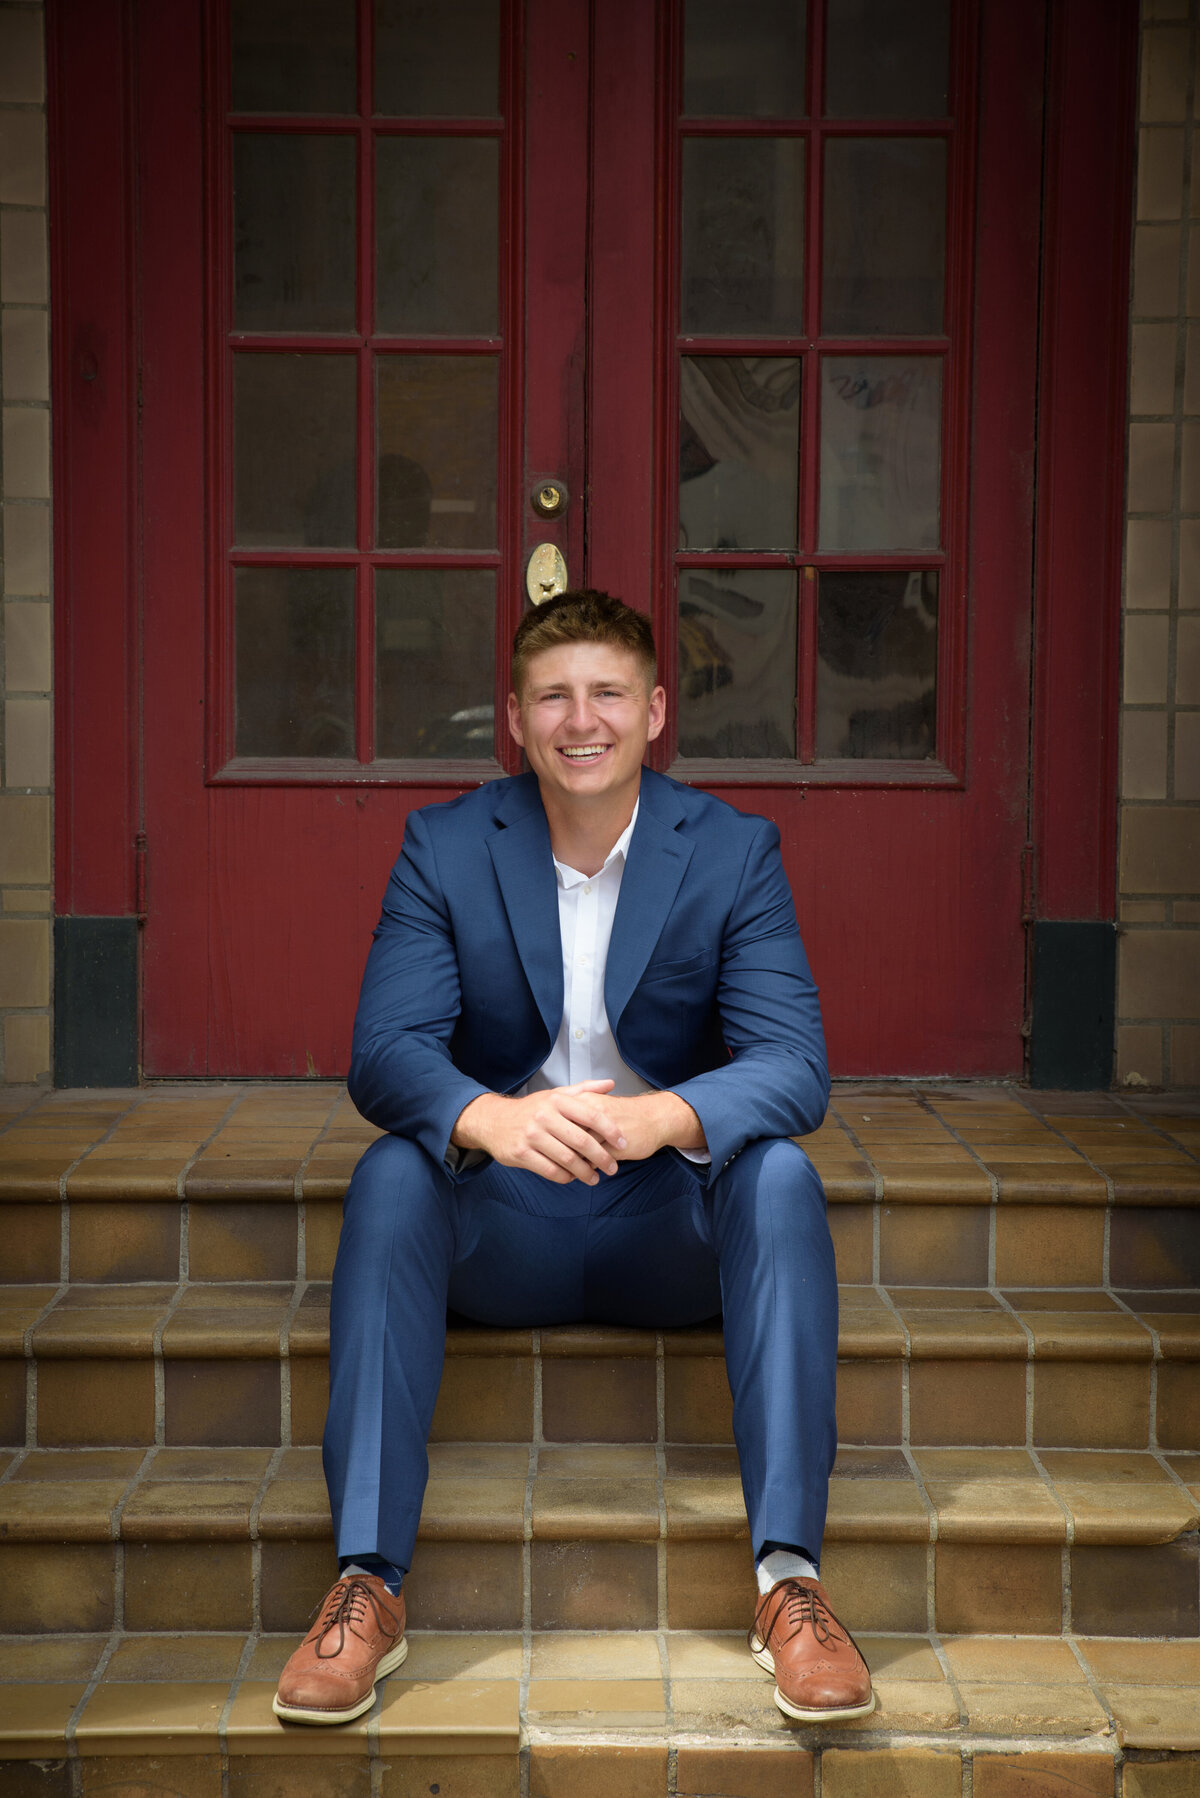 De Pere High School senior boy wearing a blue suit with white shirt sitting on stairs in front of red door in urban setting in Downtown Green Bay, Wisconsin